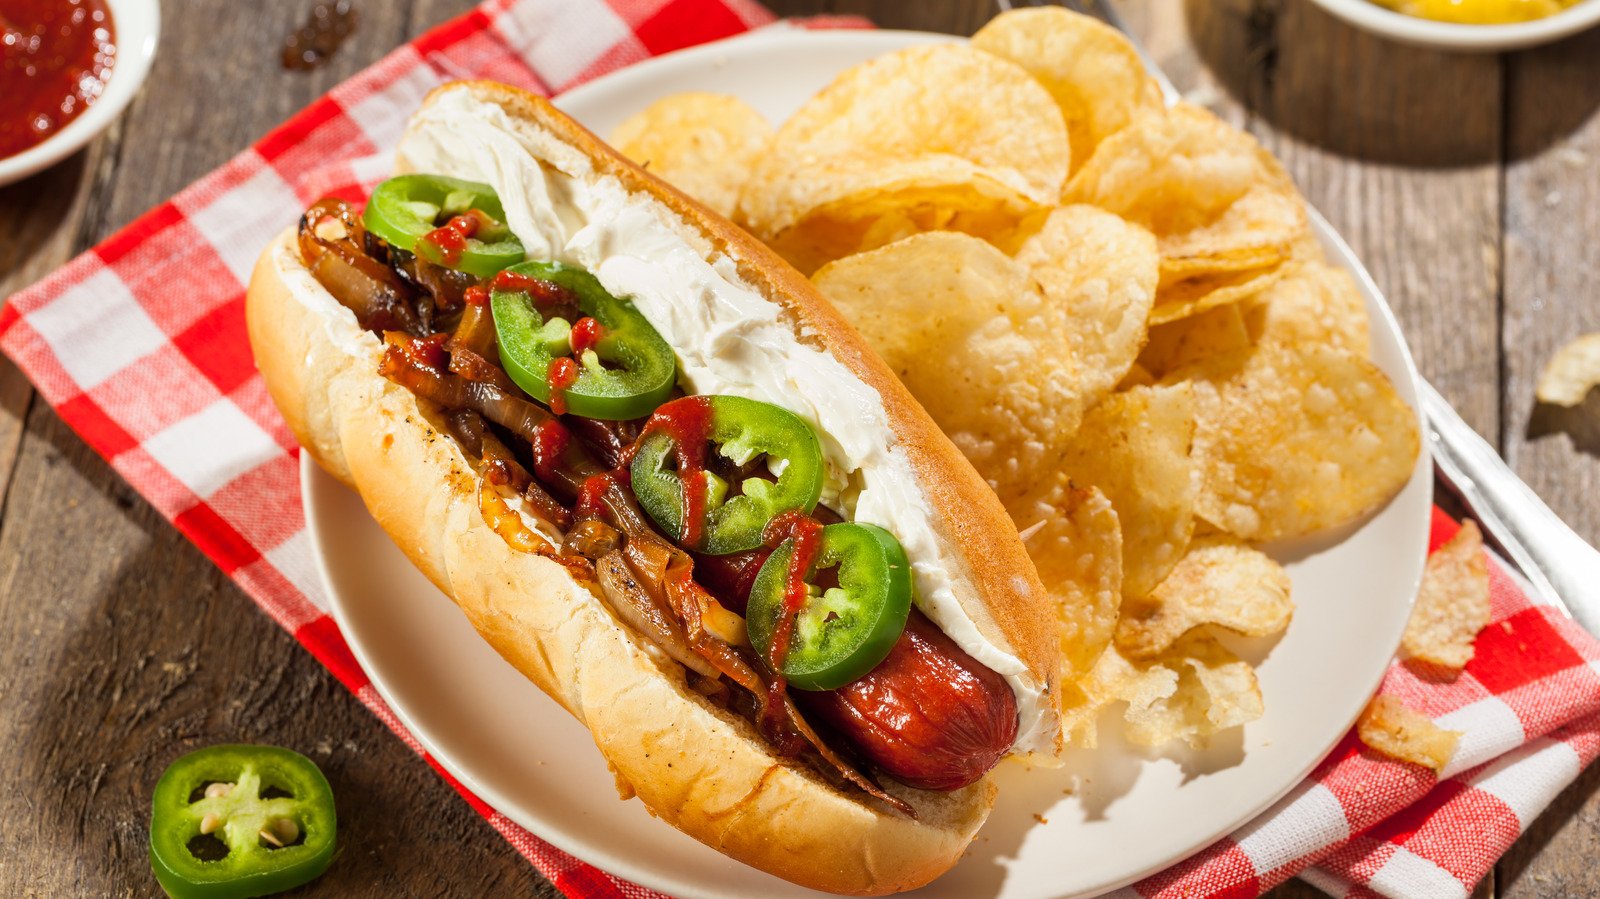 What Makes Seattle-Style Hot Dogs Unique?